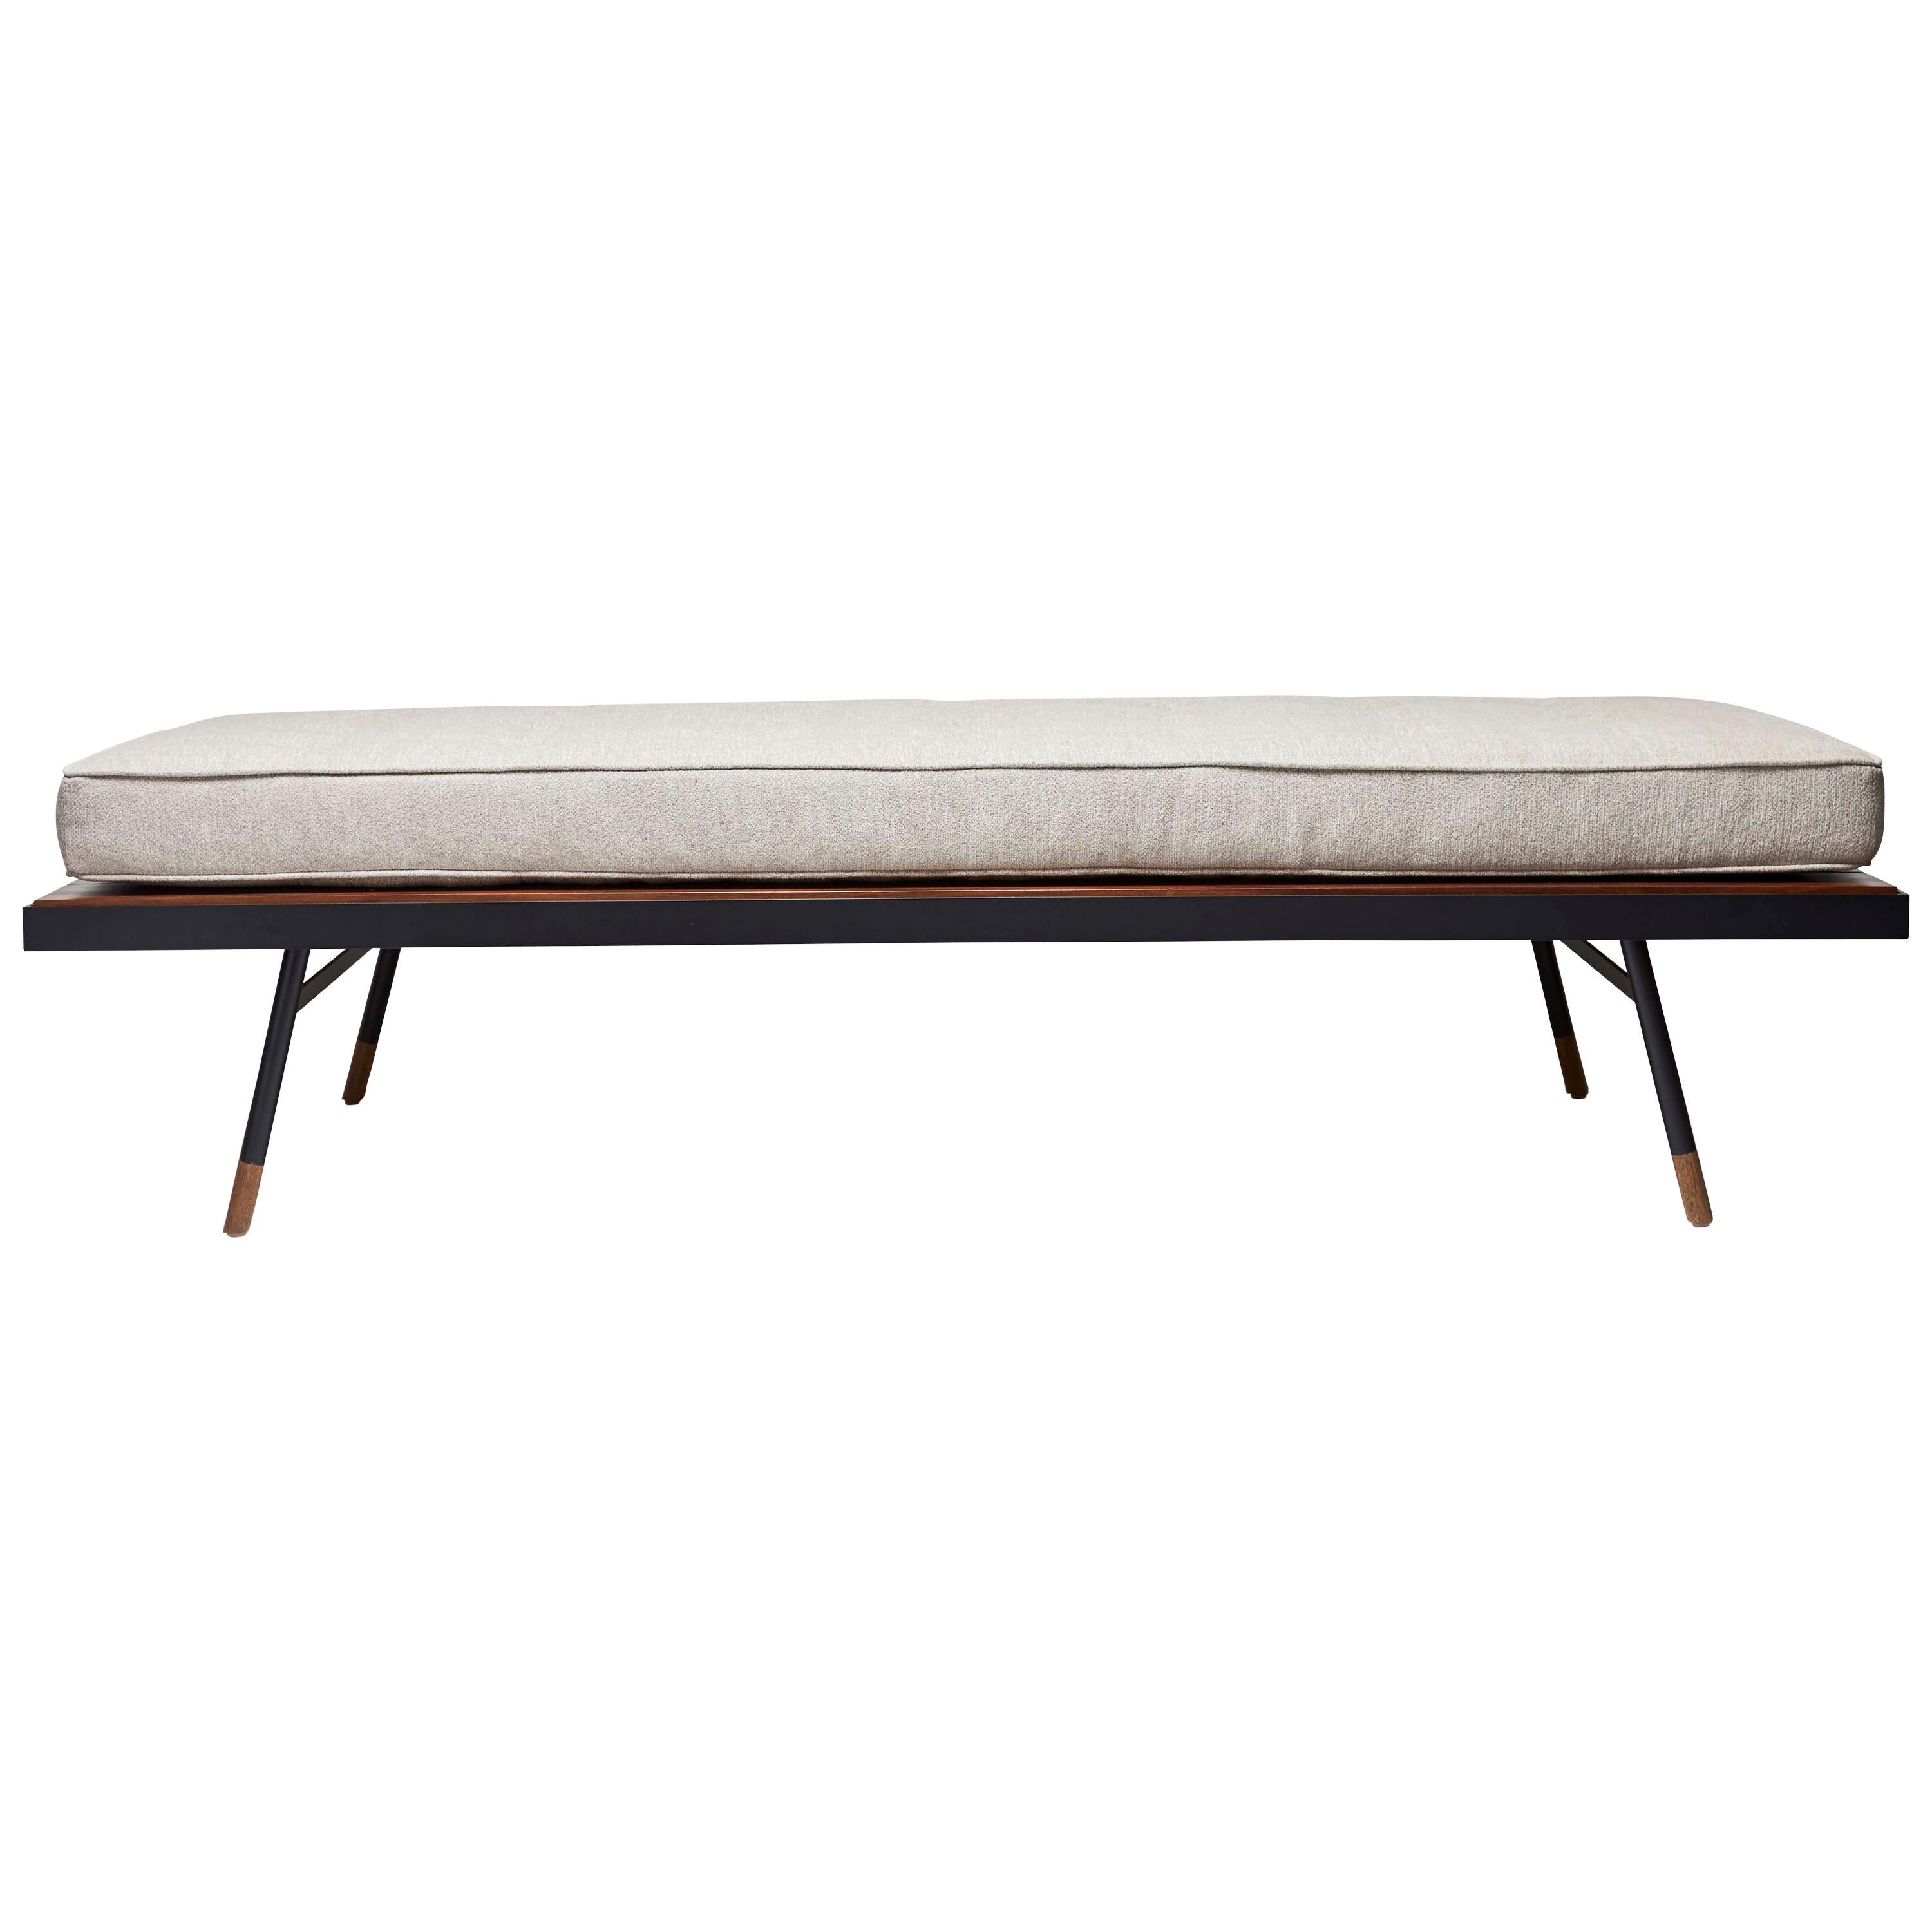 Indoor/Outdoor Montrose Daybed by Lawson-Fenning